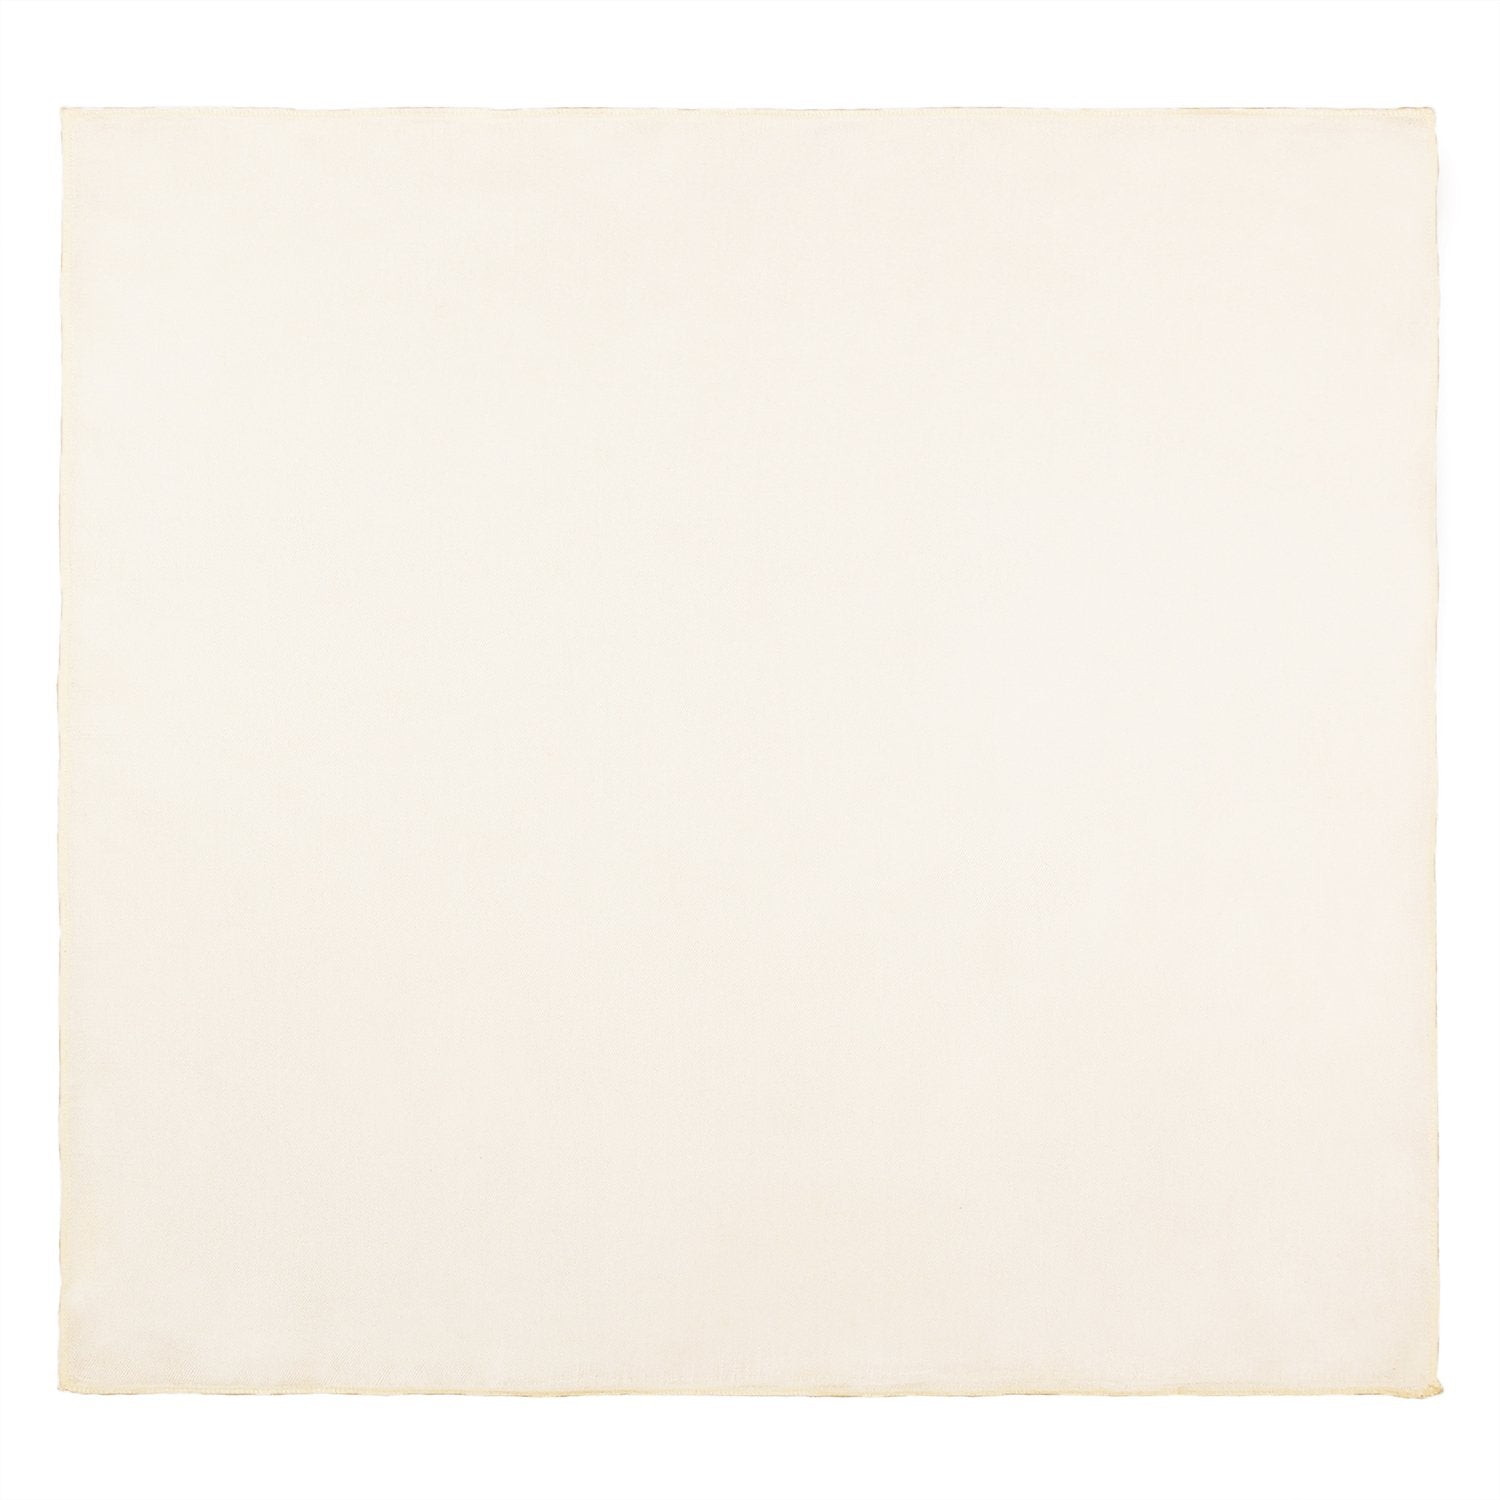 Chokore White Pure Silk Pocket Square, from the Solids Line